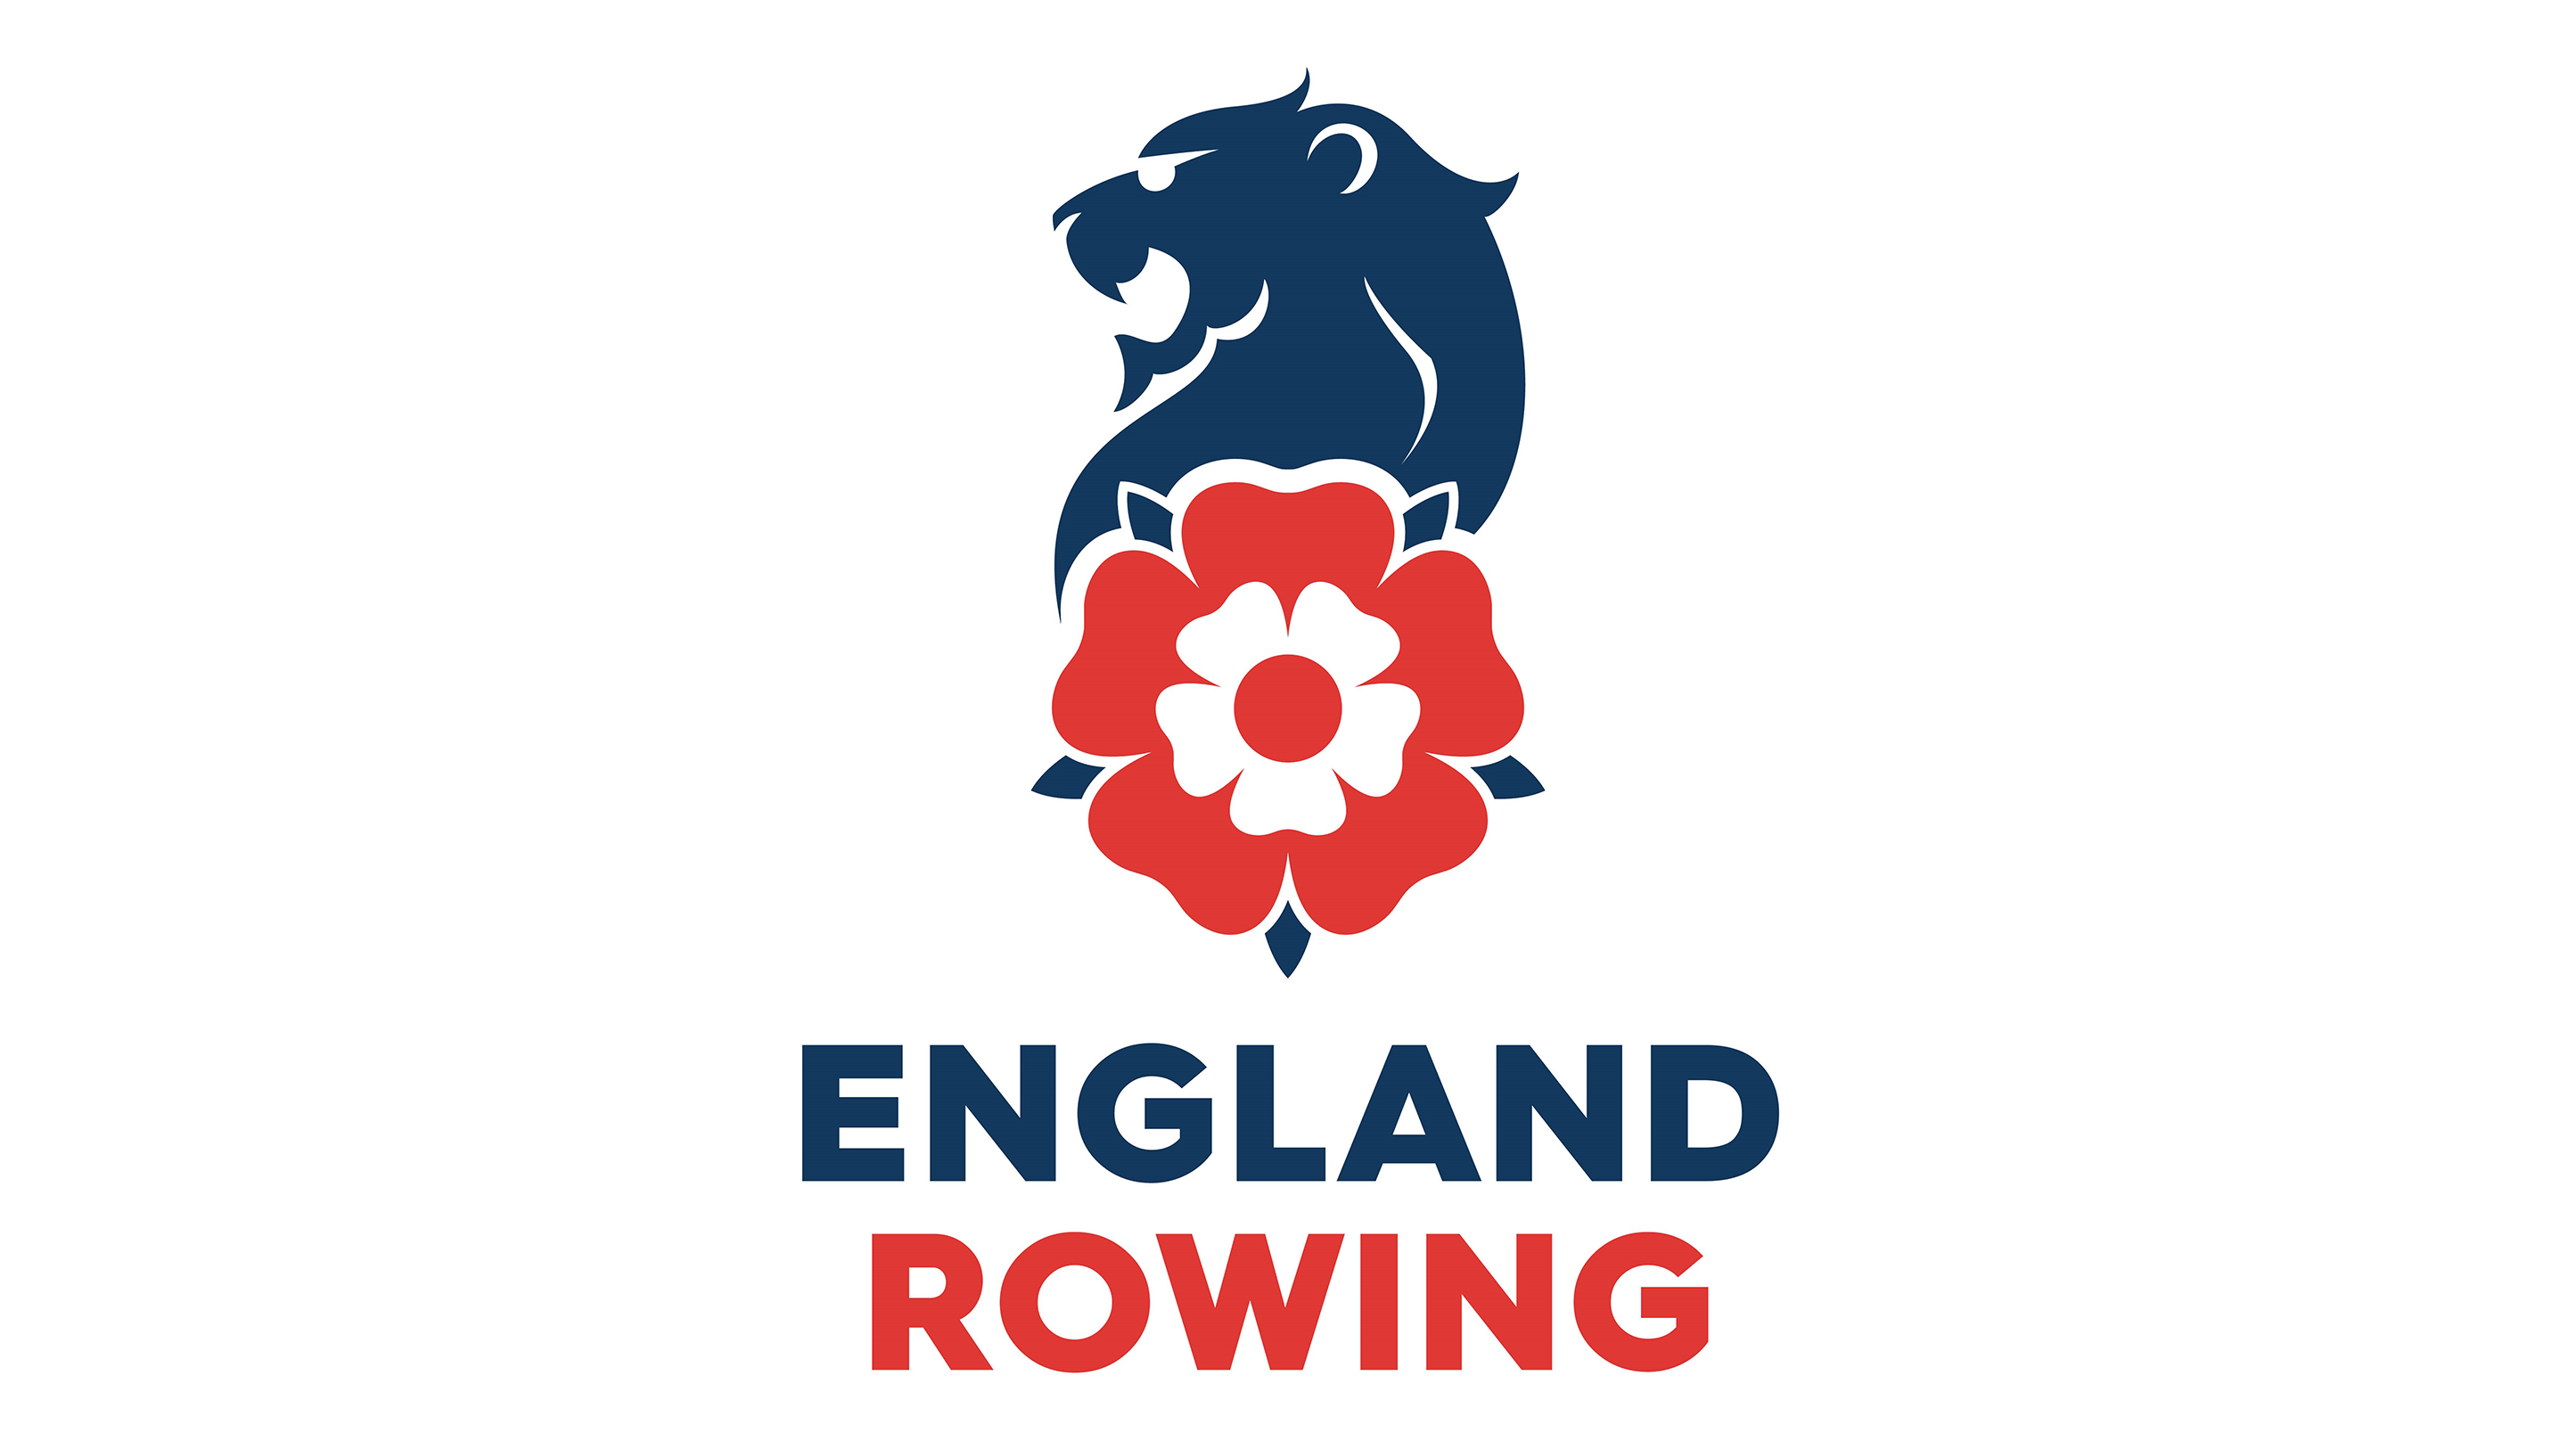 62 athletes selected to represent England at the Home International